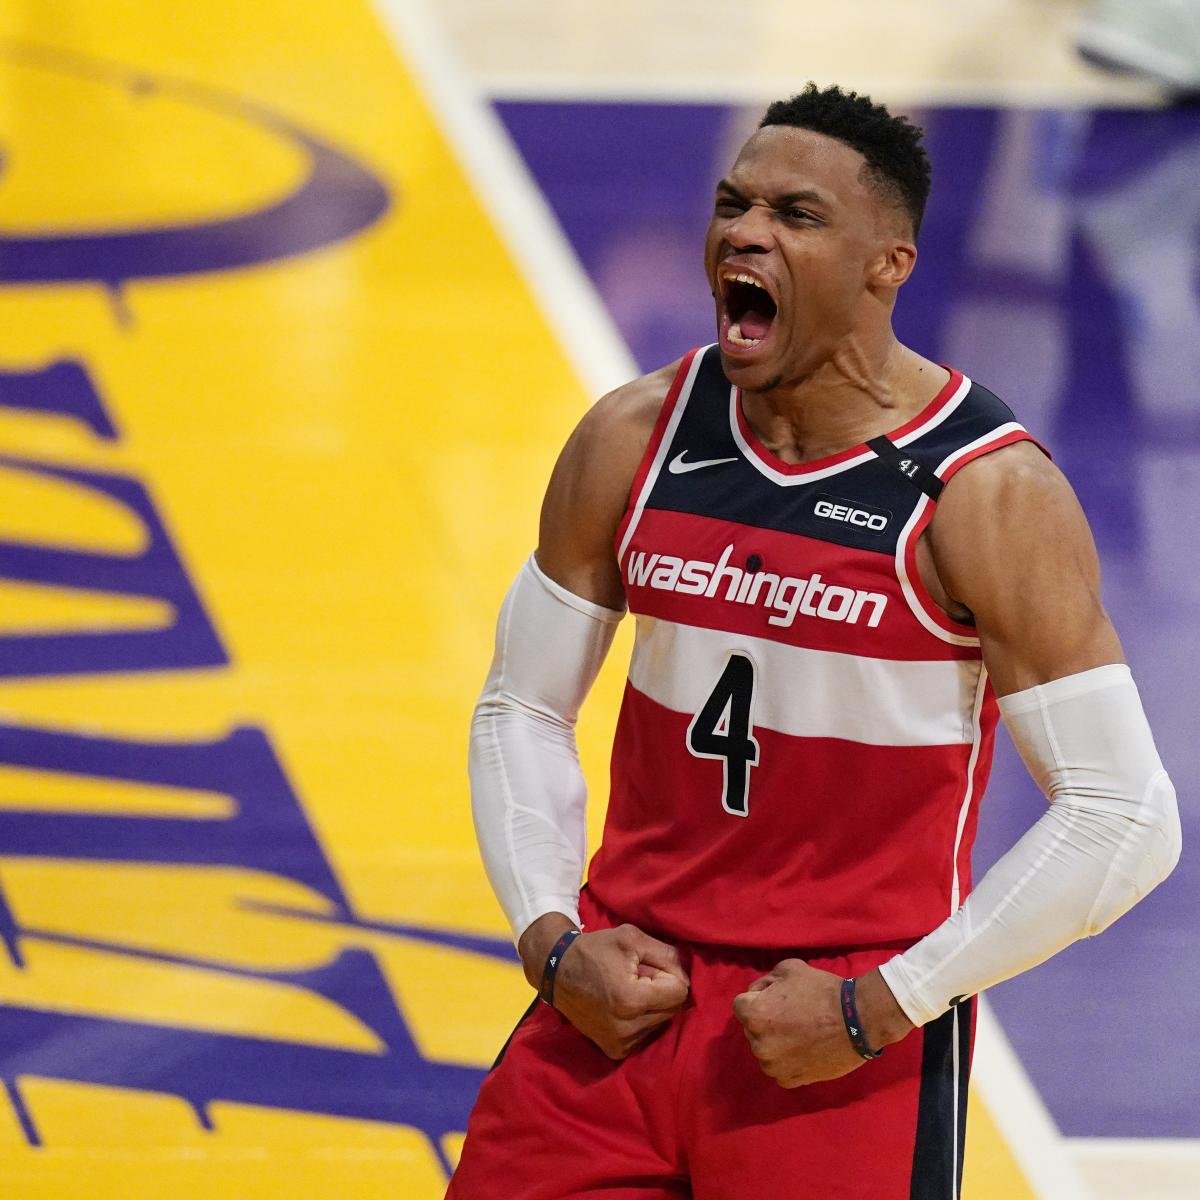 Biggest Questions (and Answers) from Blockbuster Lakers Russell Westbrook Trade